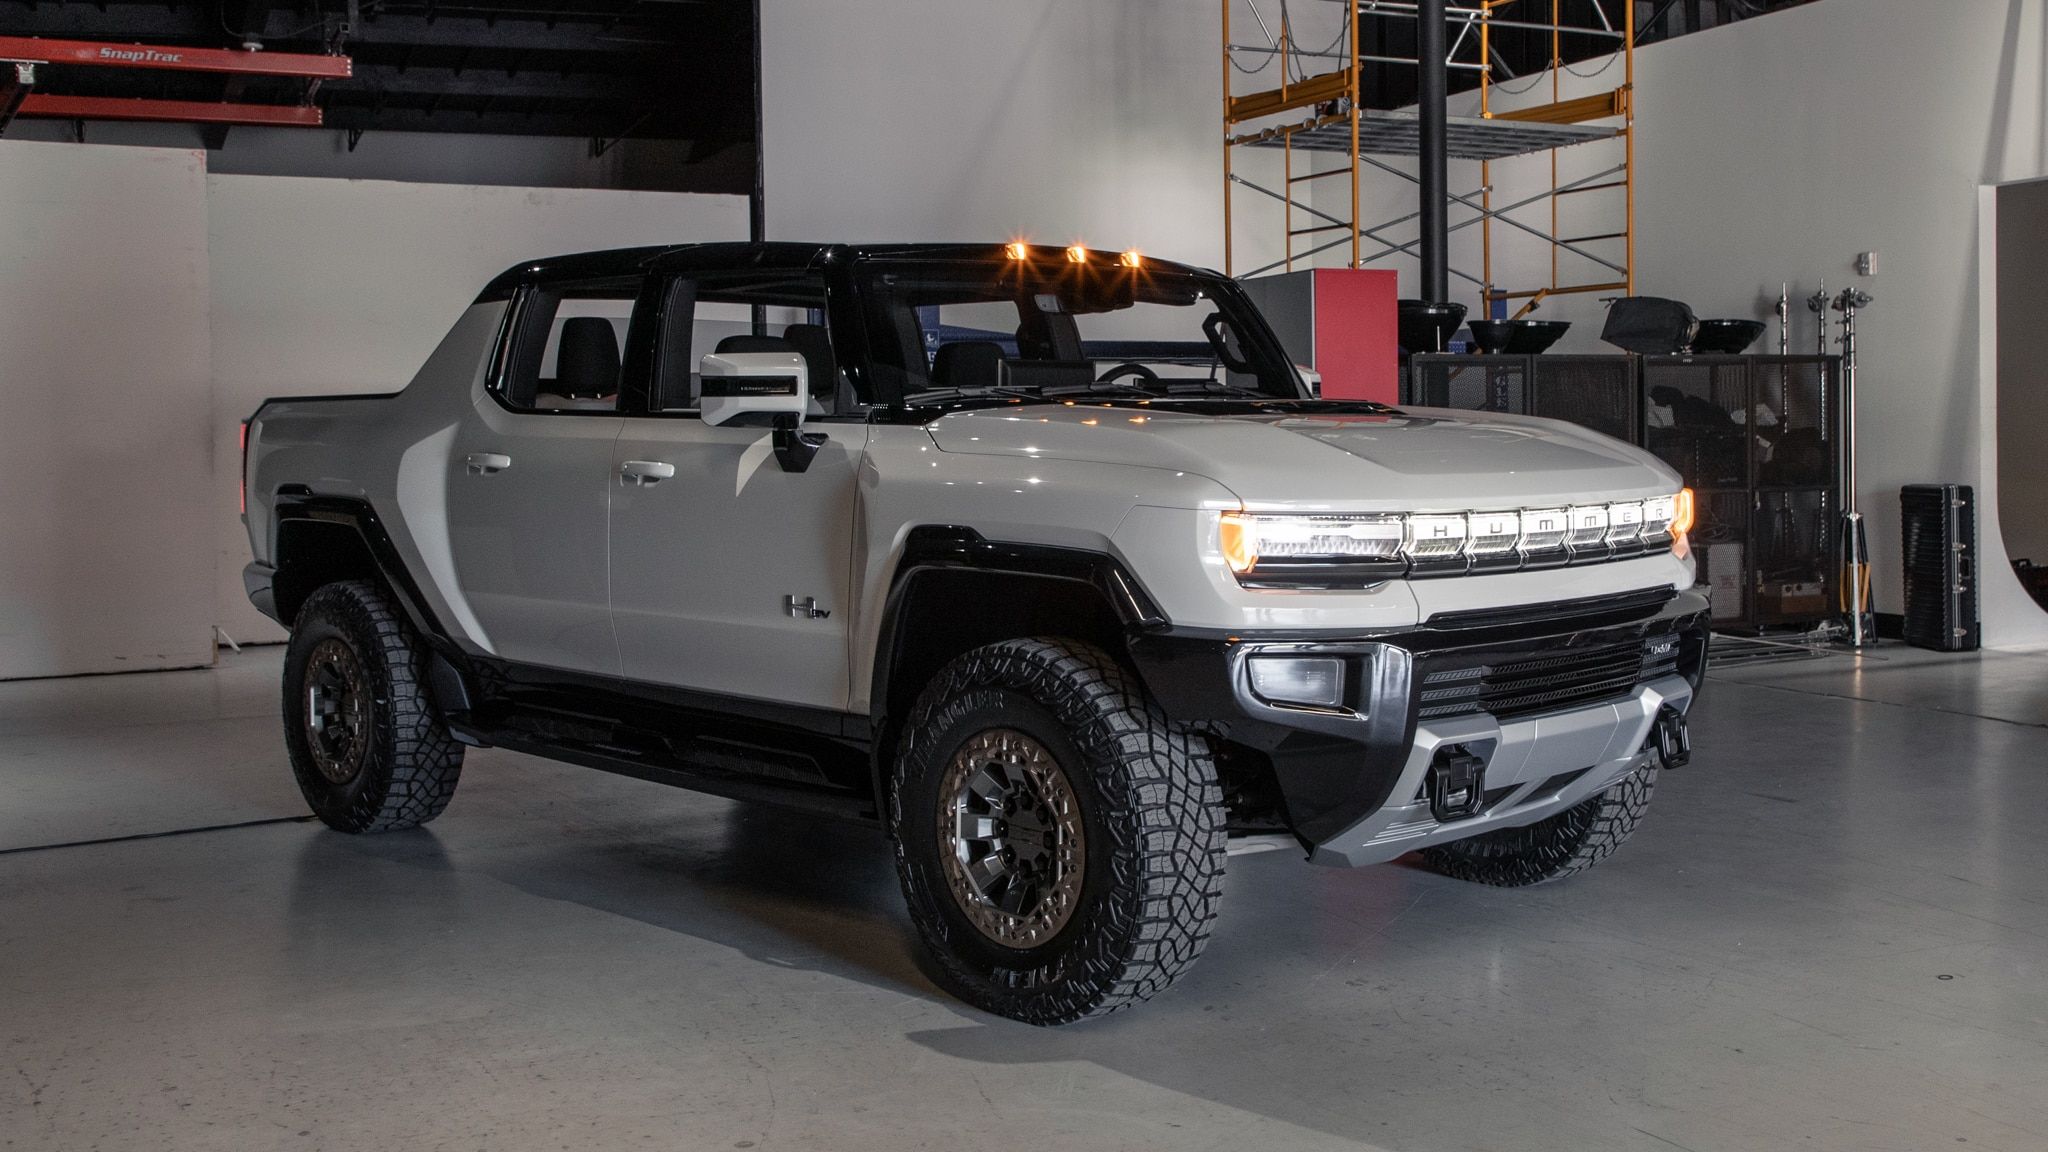 The 2022 GMC Hummer EV: 15 Exceptionally Cool Things We Saw in Person